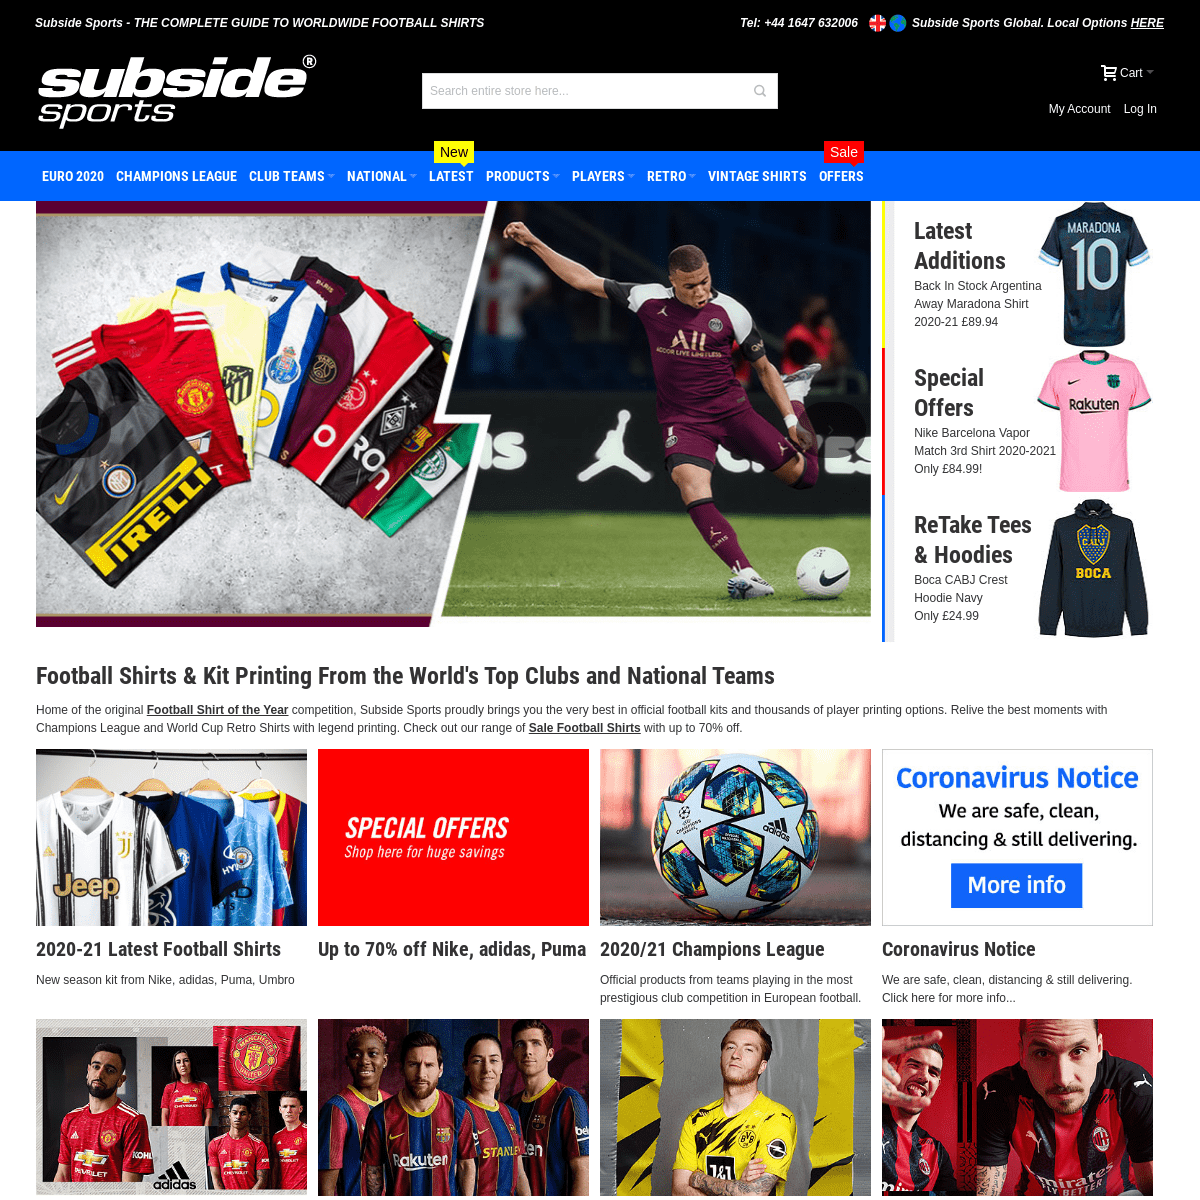 A complete backup of subsidesports.com